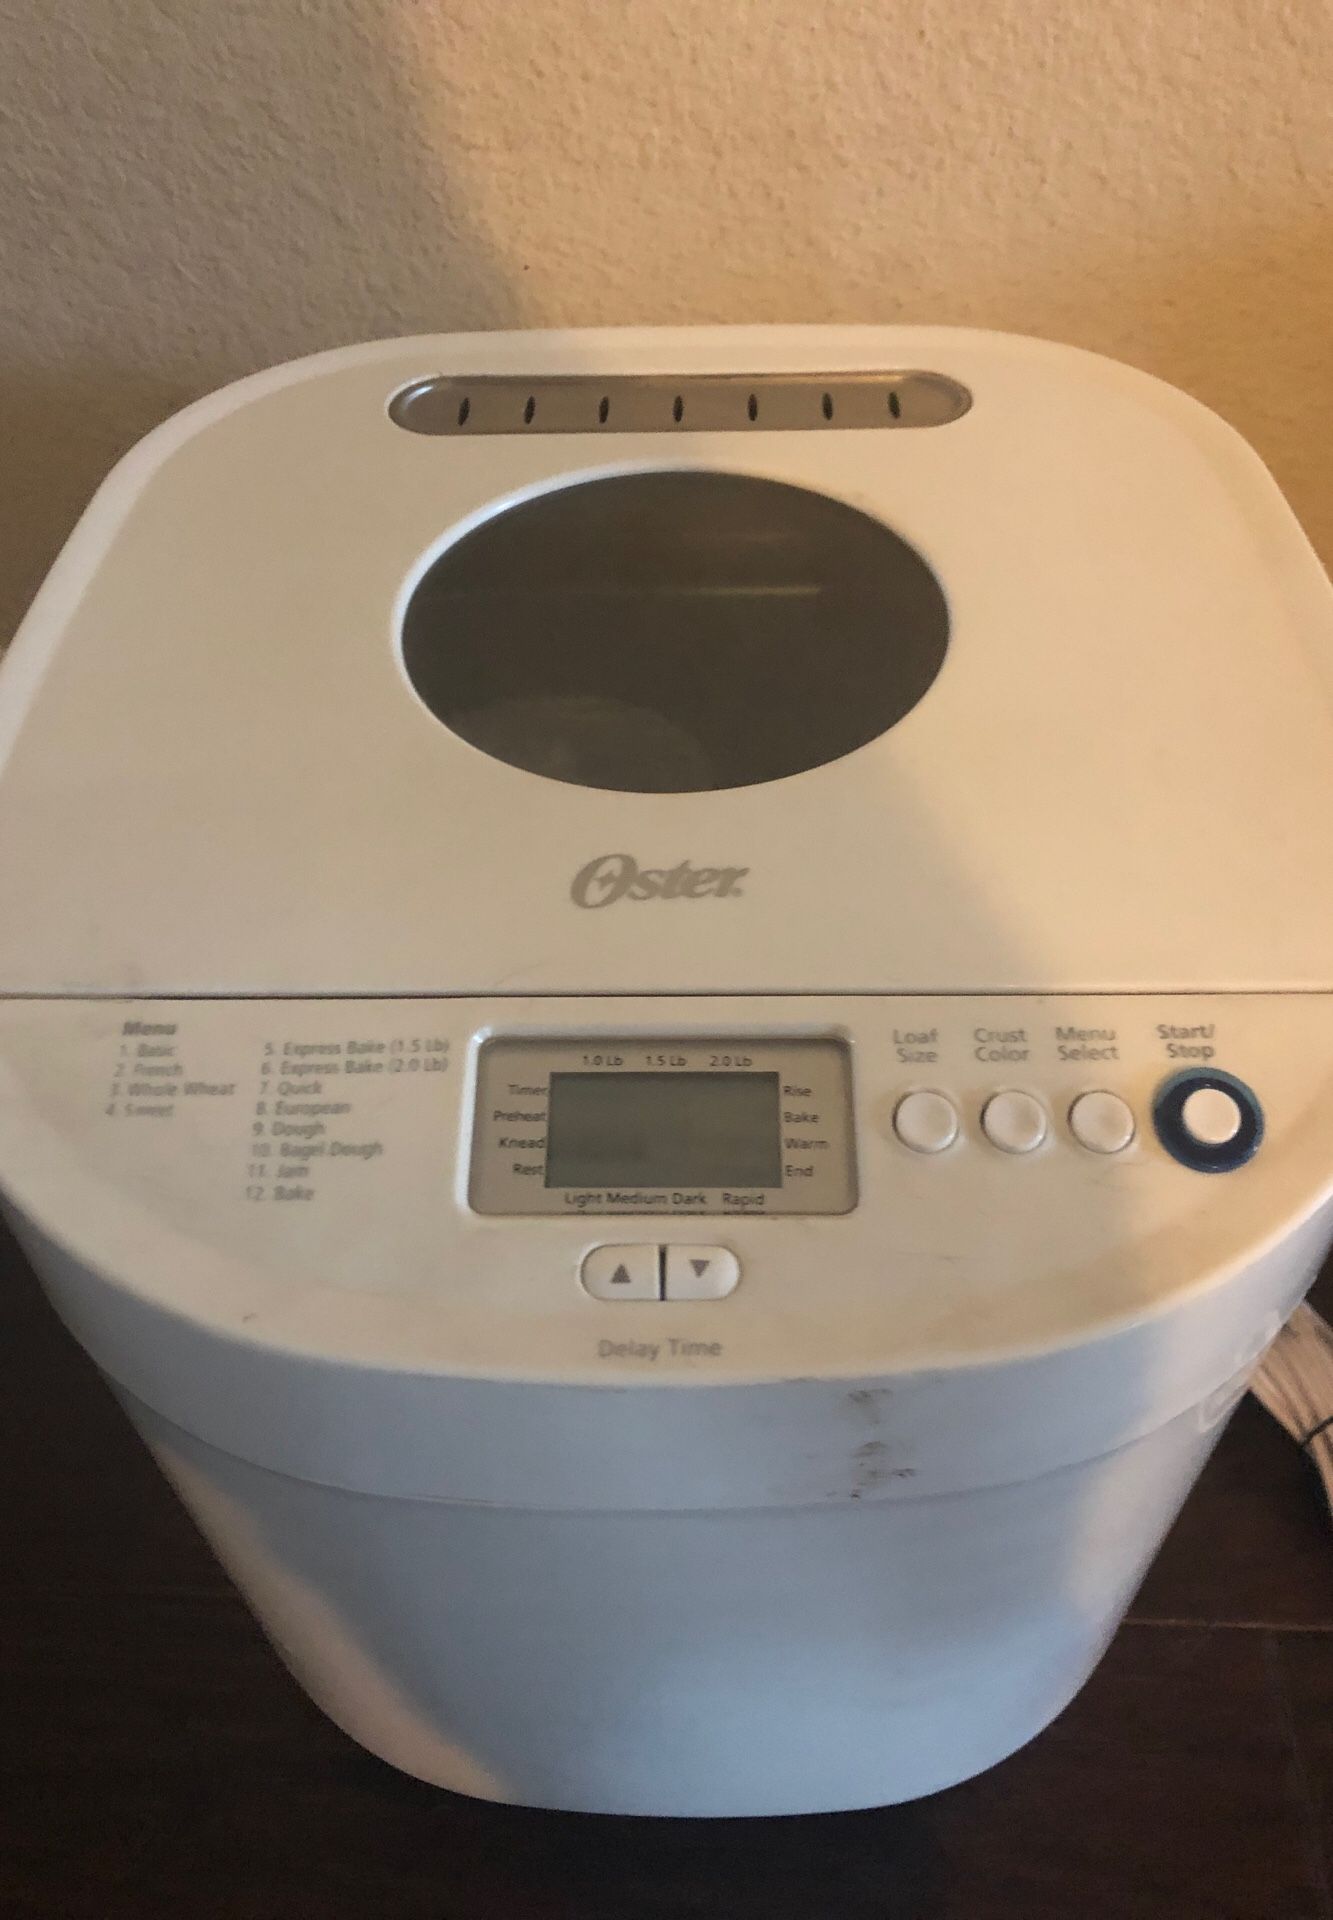 Oster bread maker. Never used